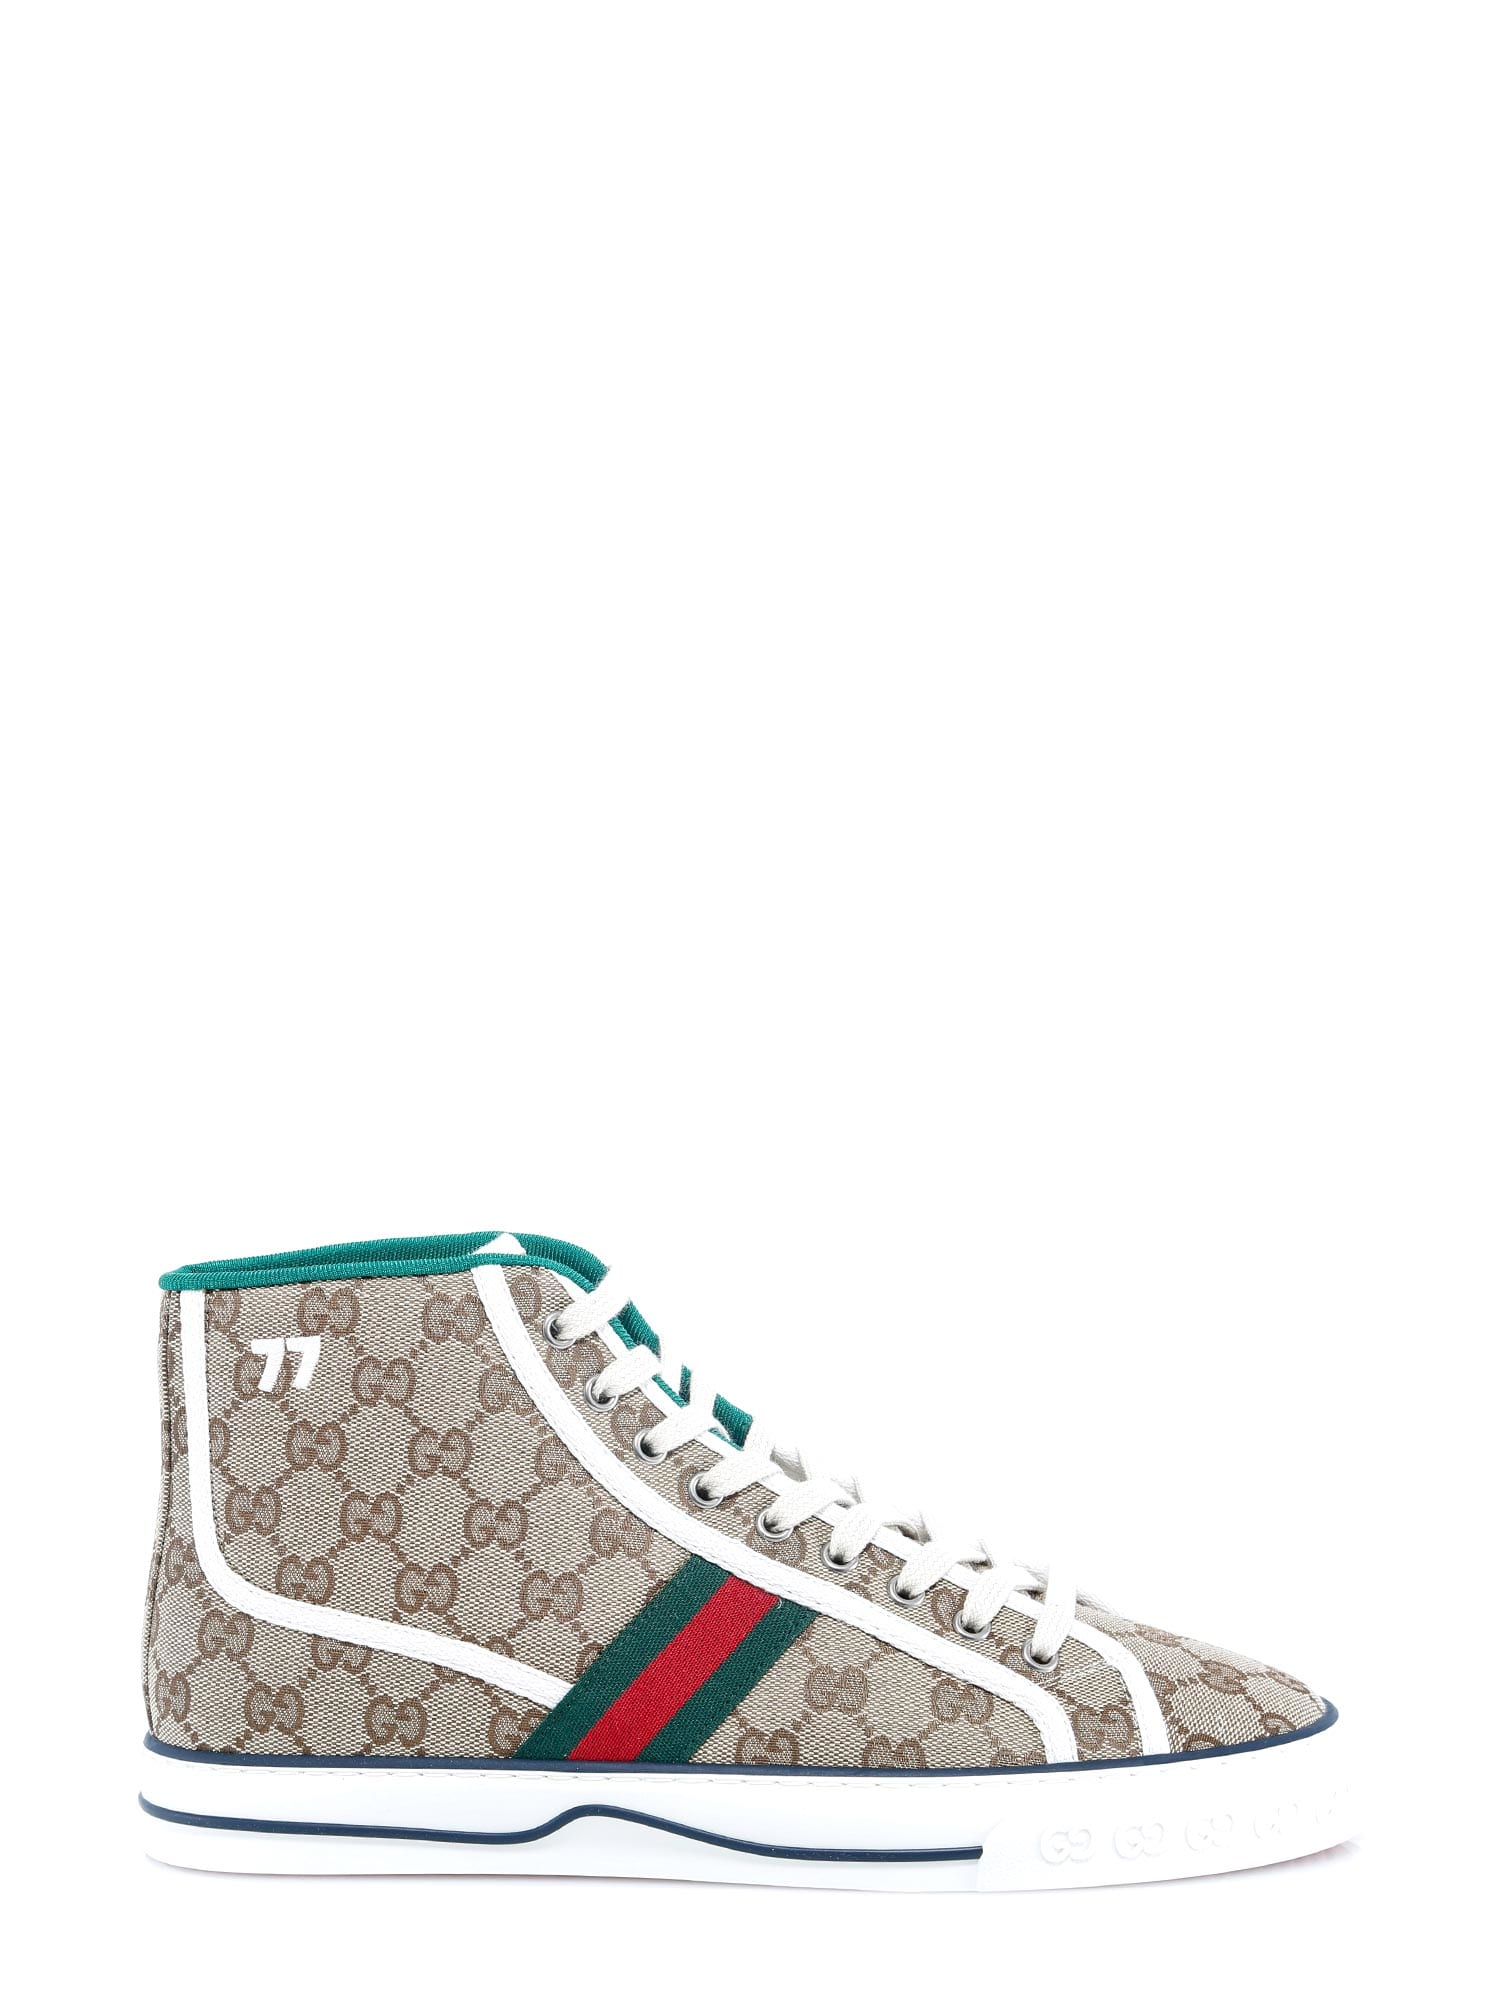 GUCCI TENNIS 1977 HIGH TOP SNEAKERS